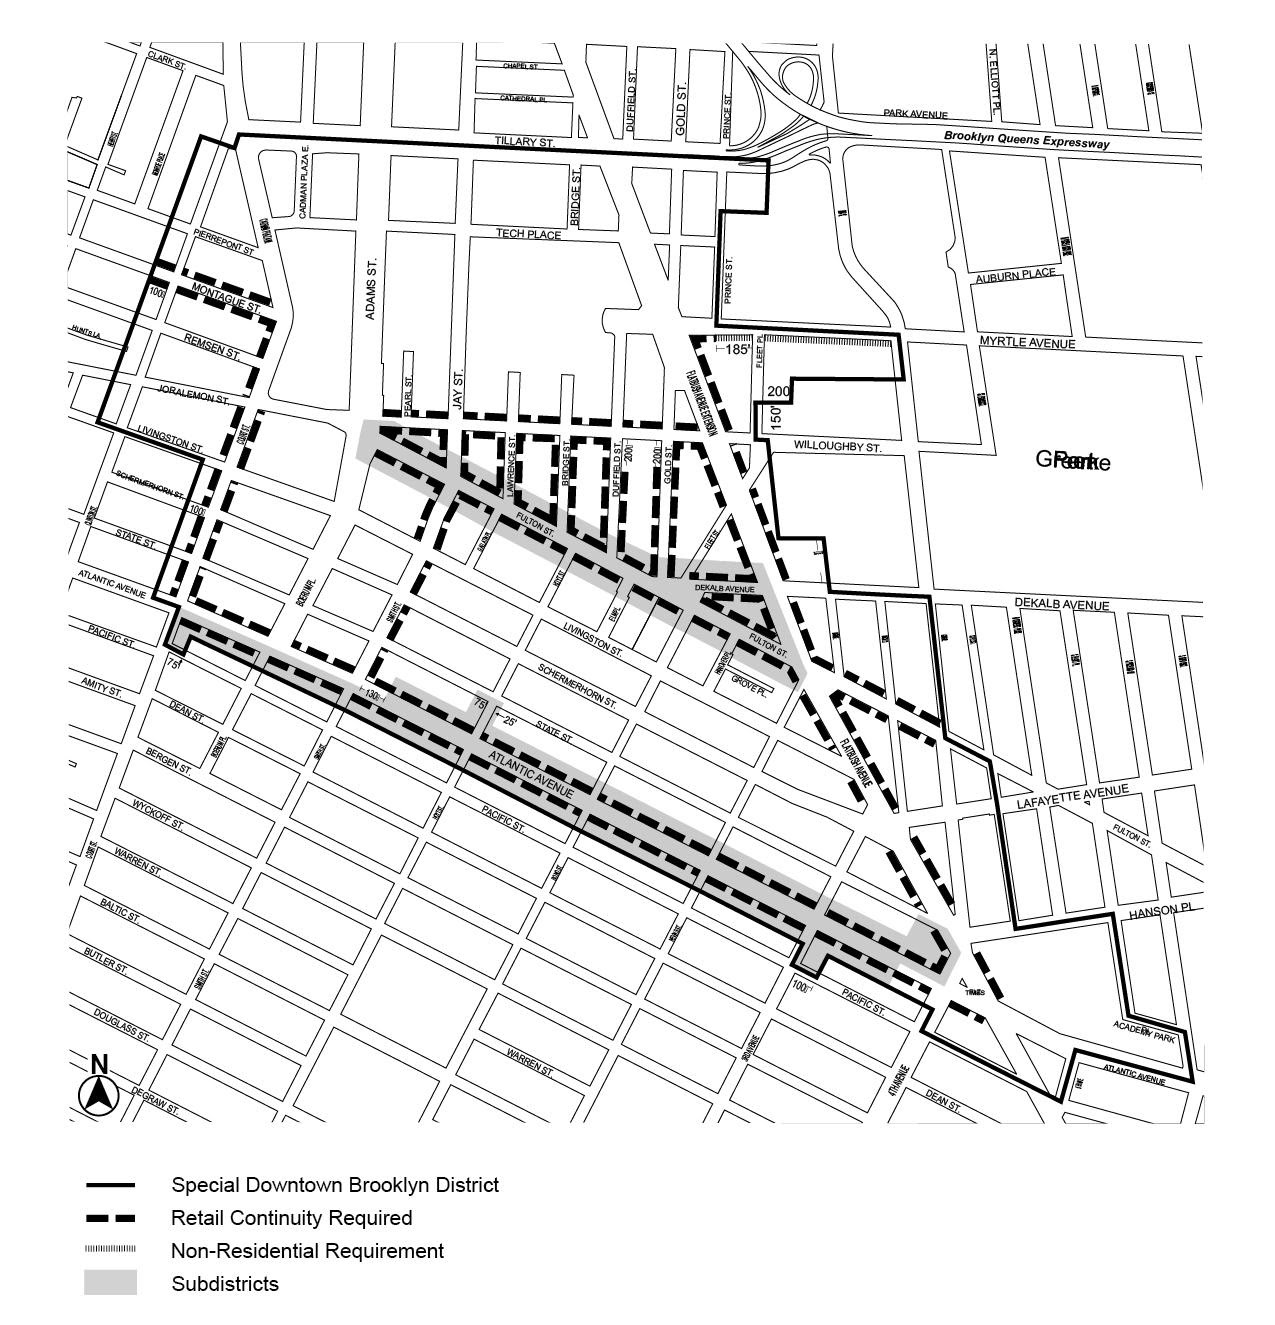 Zoning Resolutions Chapter 1: Special Downtown Brooklyn District Appendix E.1